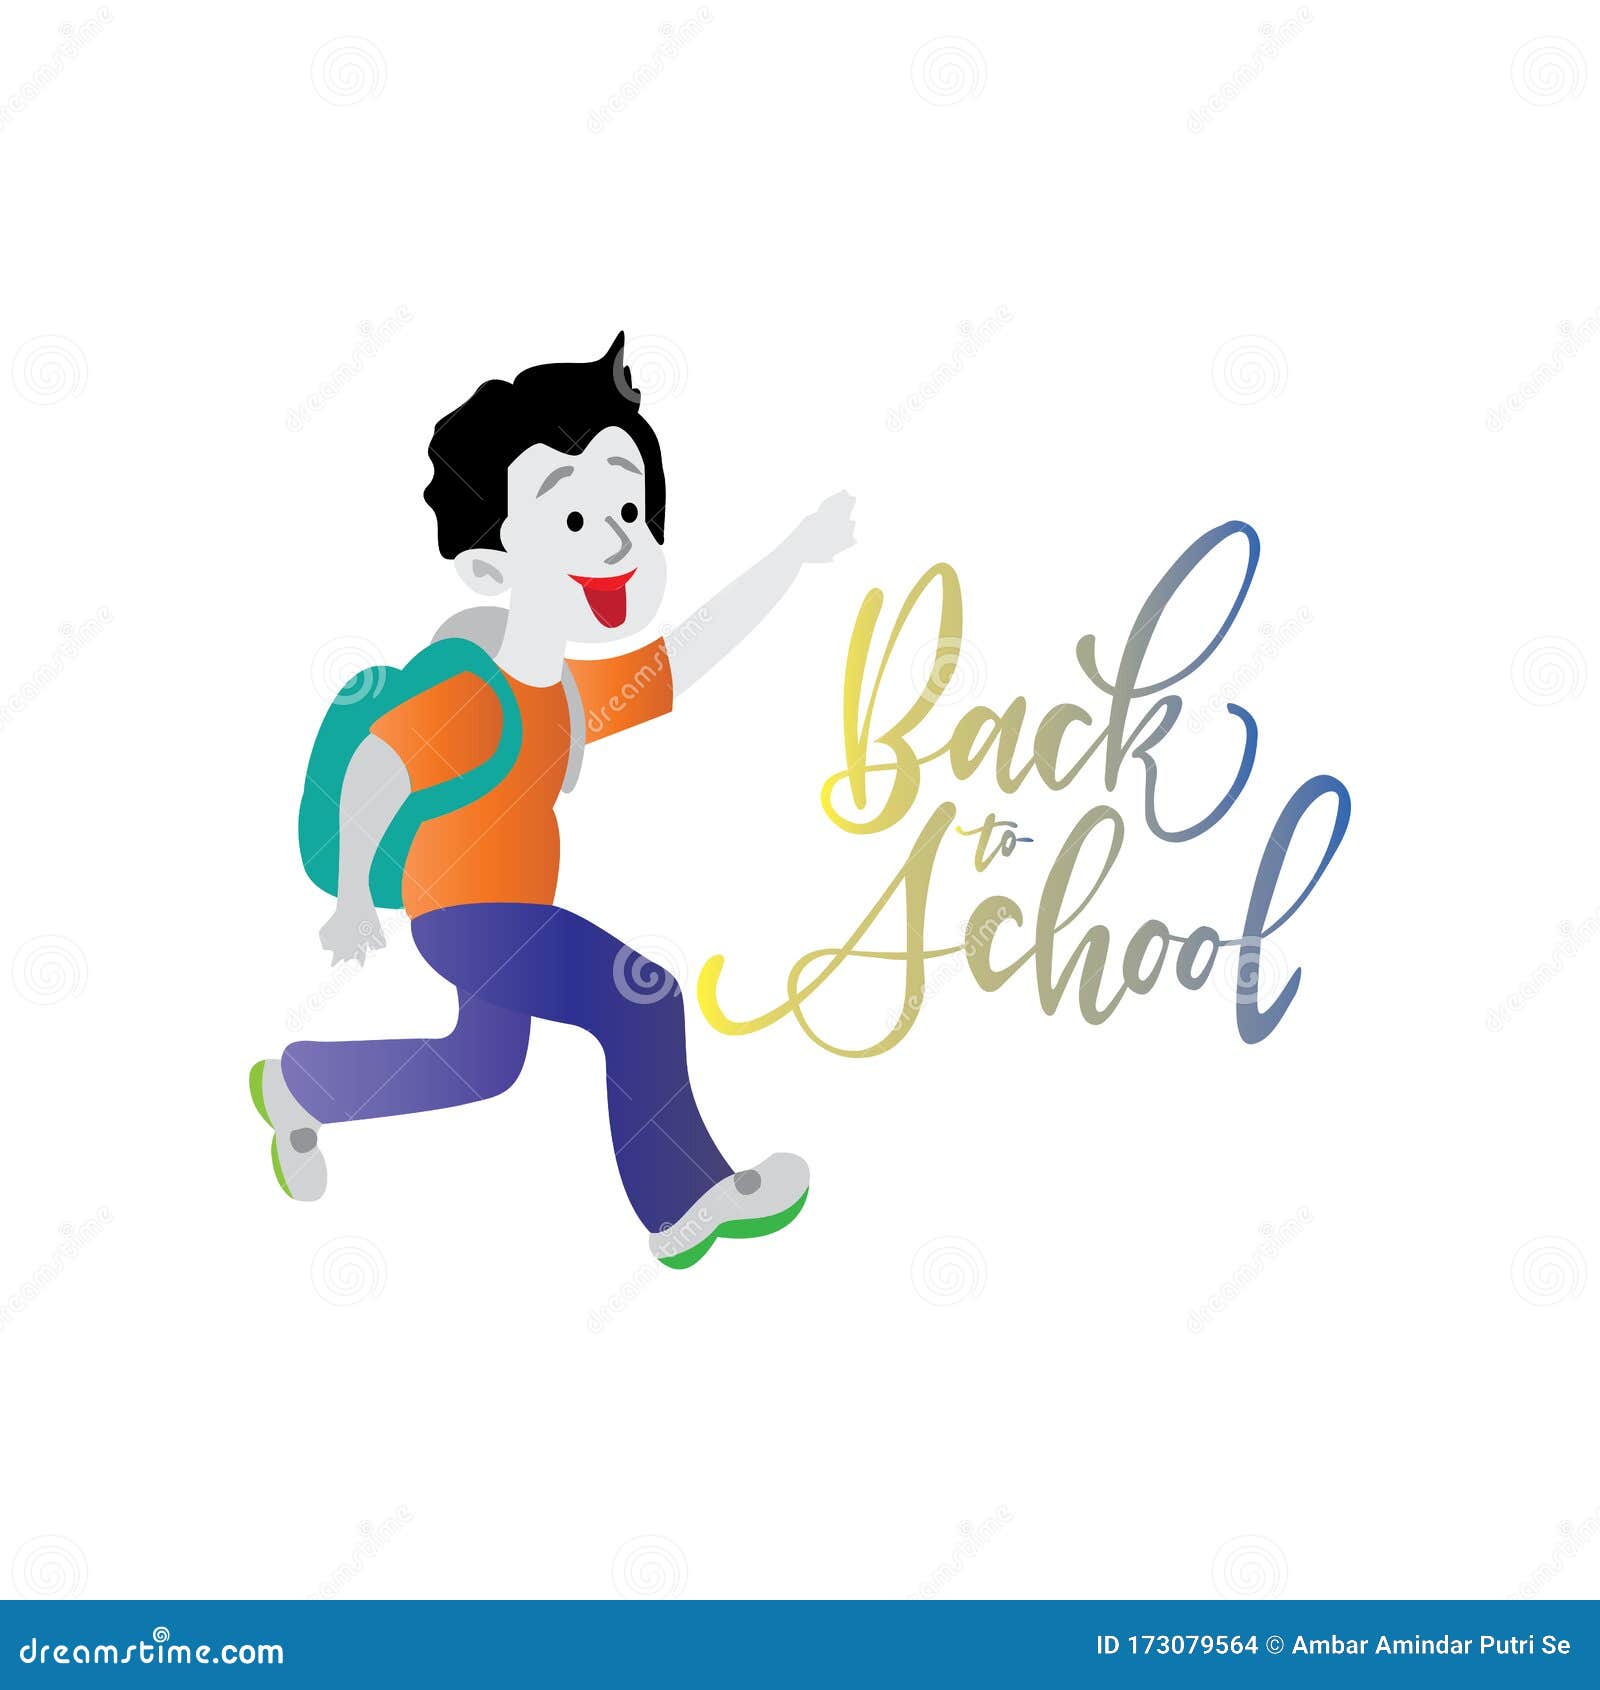 Back To School Inspirational And Motivational Quotes Stock Illustration Illustration Of Concept Childhood